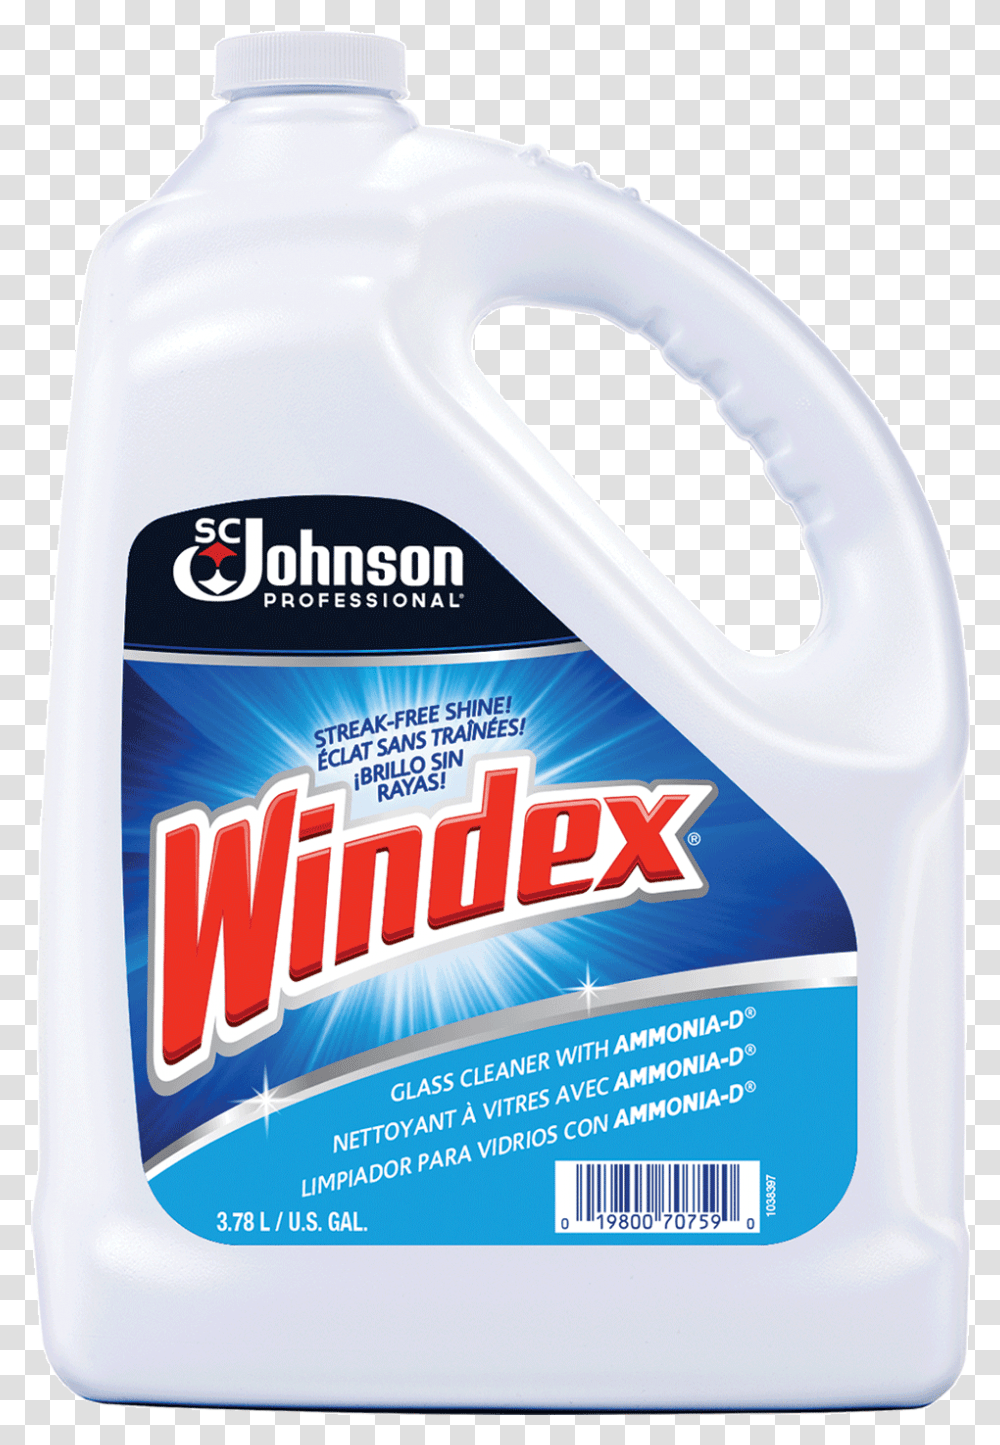 Windex Glass Cleaner With Ammonia D Cleaning Supplies Windex, Bottle, Cosmetics Transparent Png